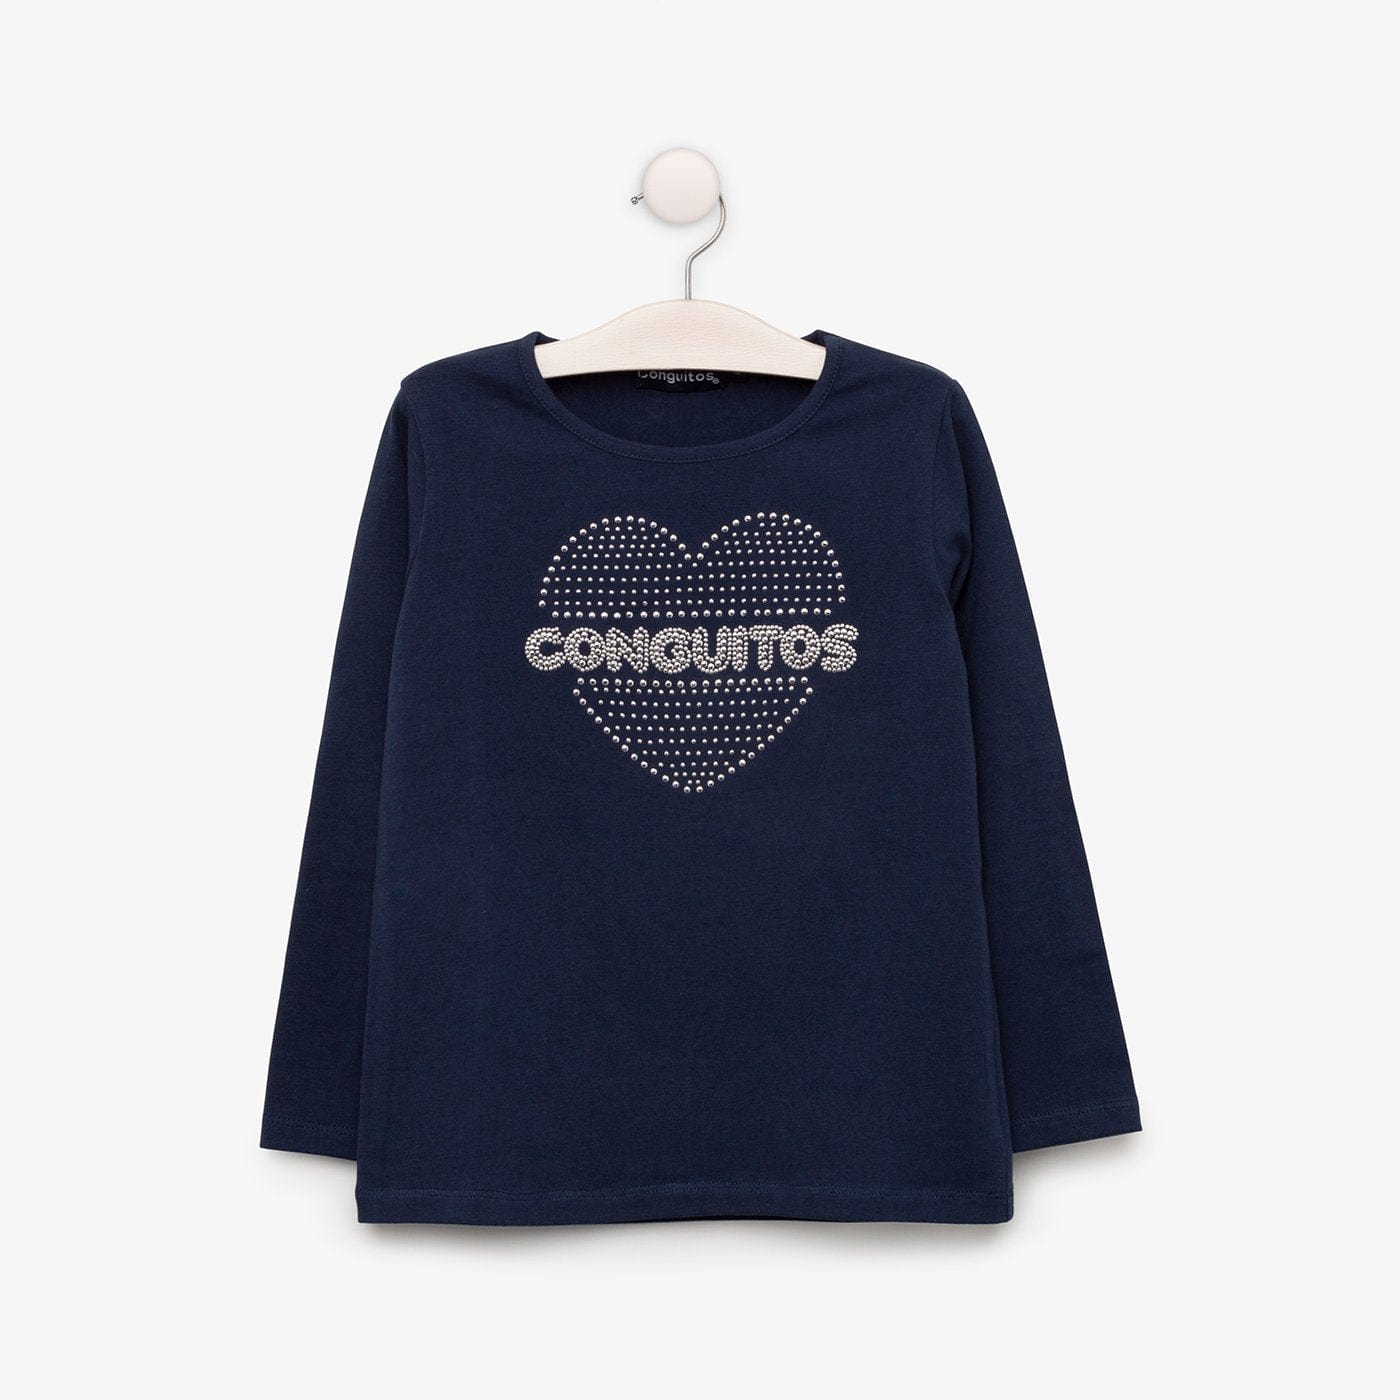 CONGUITOS TEXTIL Clothing Girl's Navy "Heart Strass" T-shirt